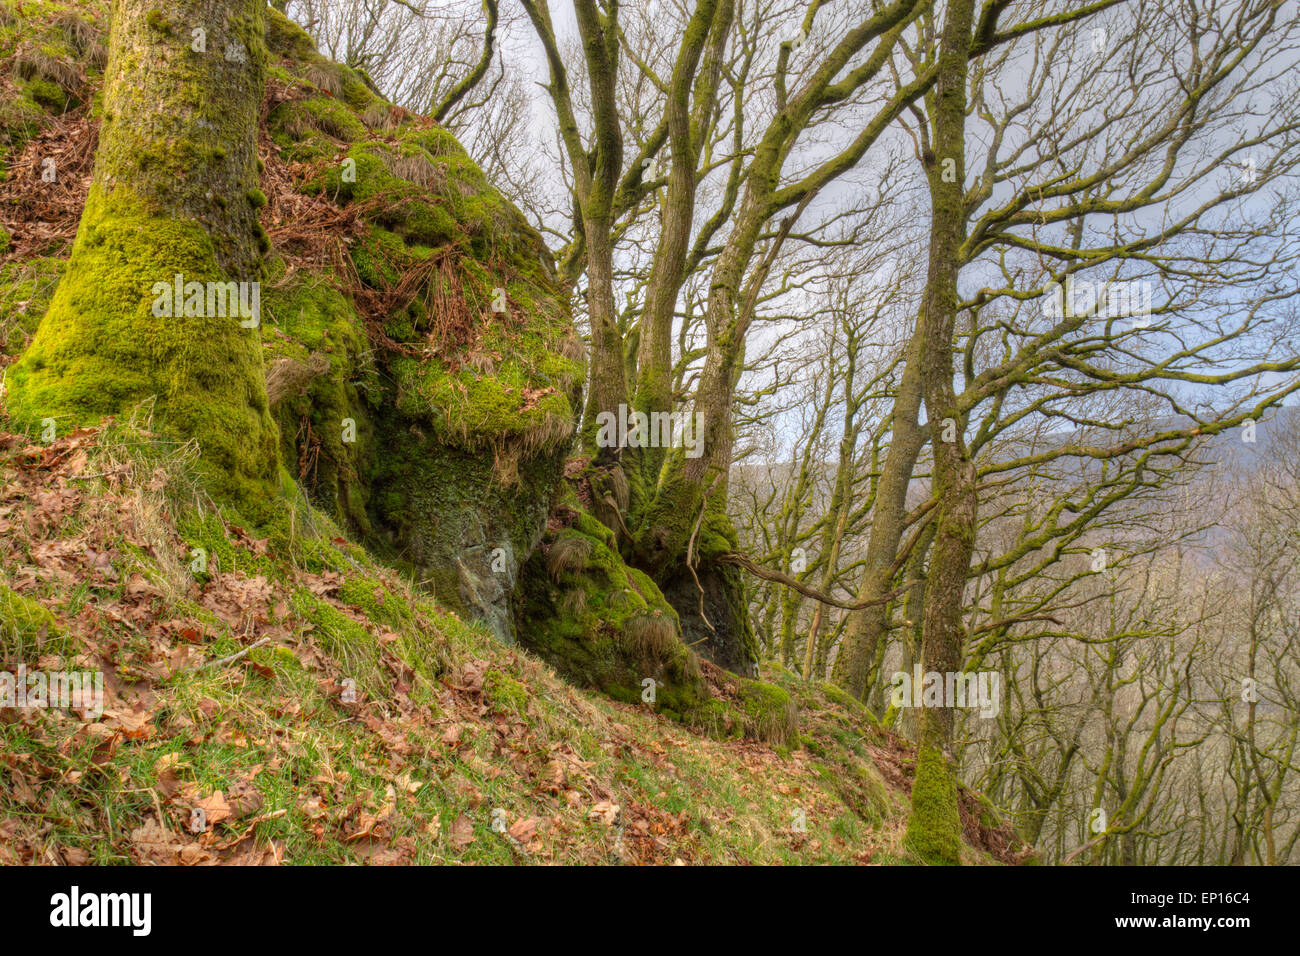 Rock outcrop in sessile oak (Quercus petraea) woodland. Gilfach Farm Reserve.  Powys, Wales. March. Stock Photo